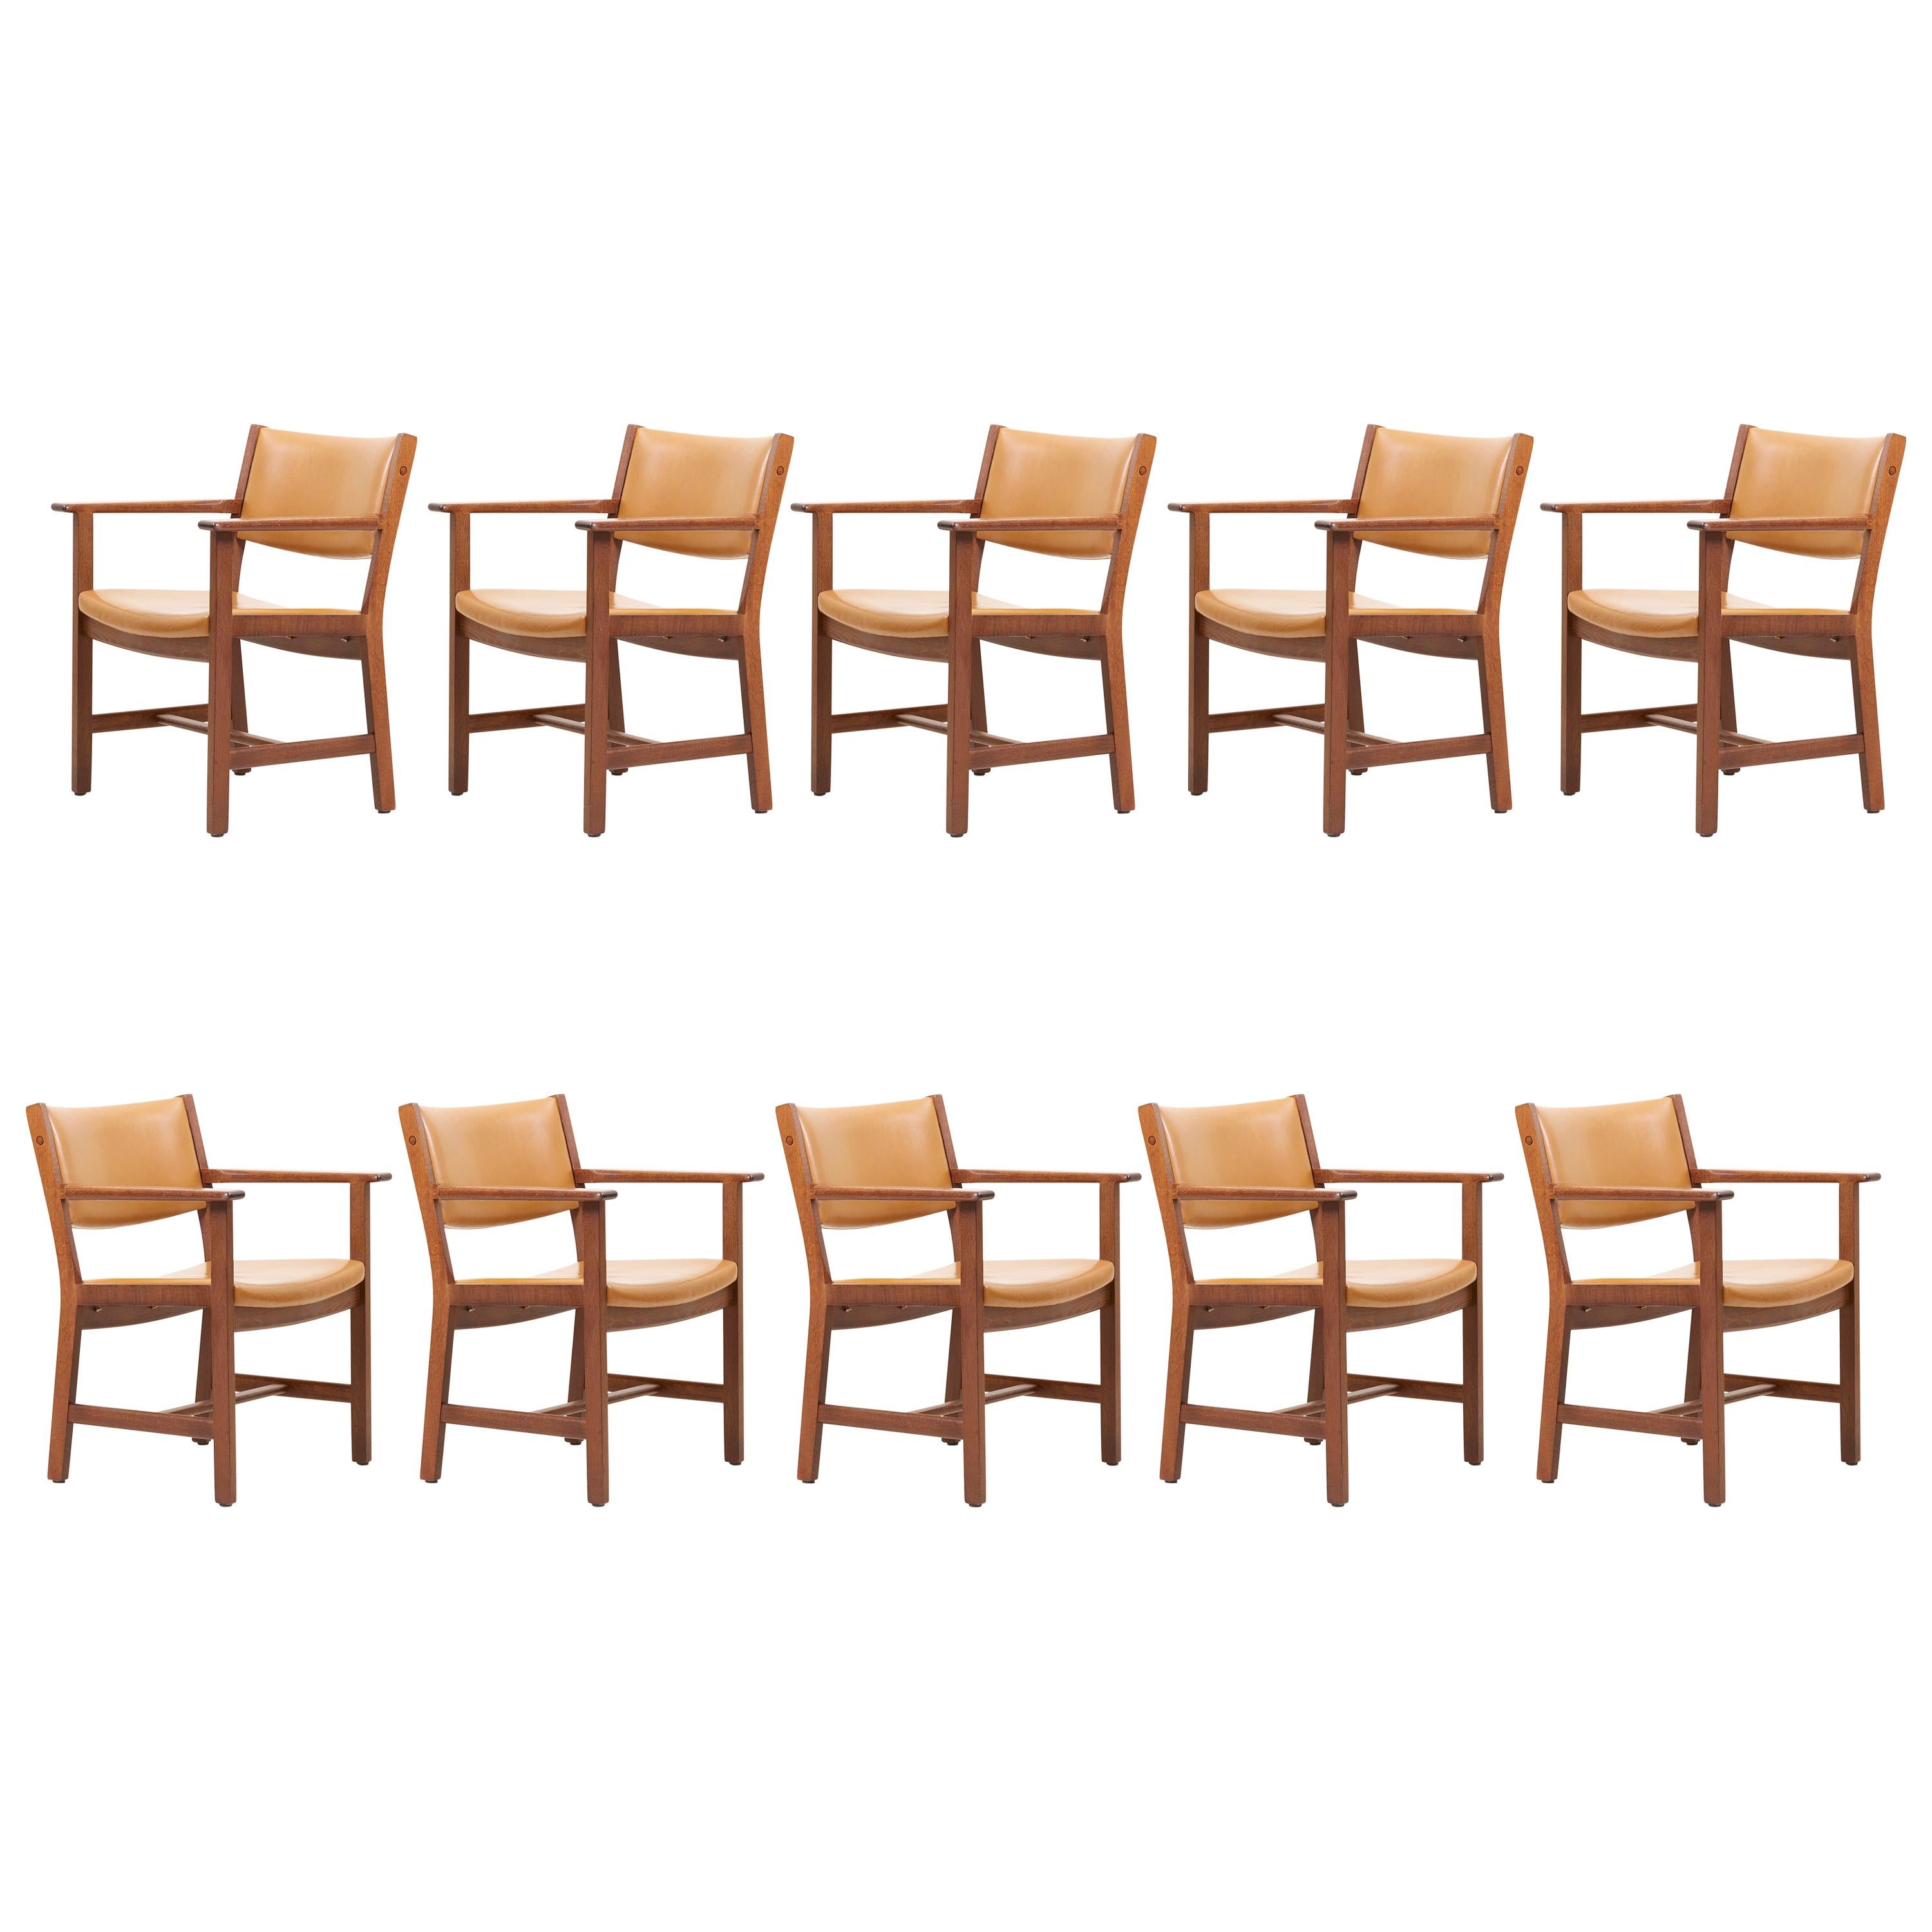 Set of Ten GE 1960s Armchairs in Leather by Hans Wegner for by GETAMA, Denmark